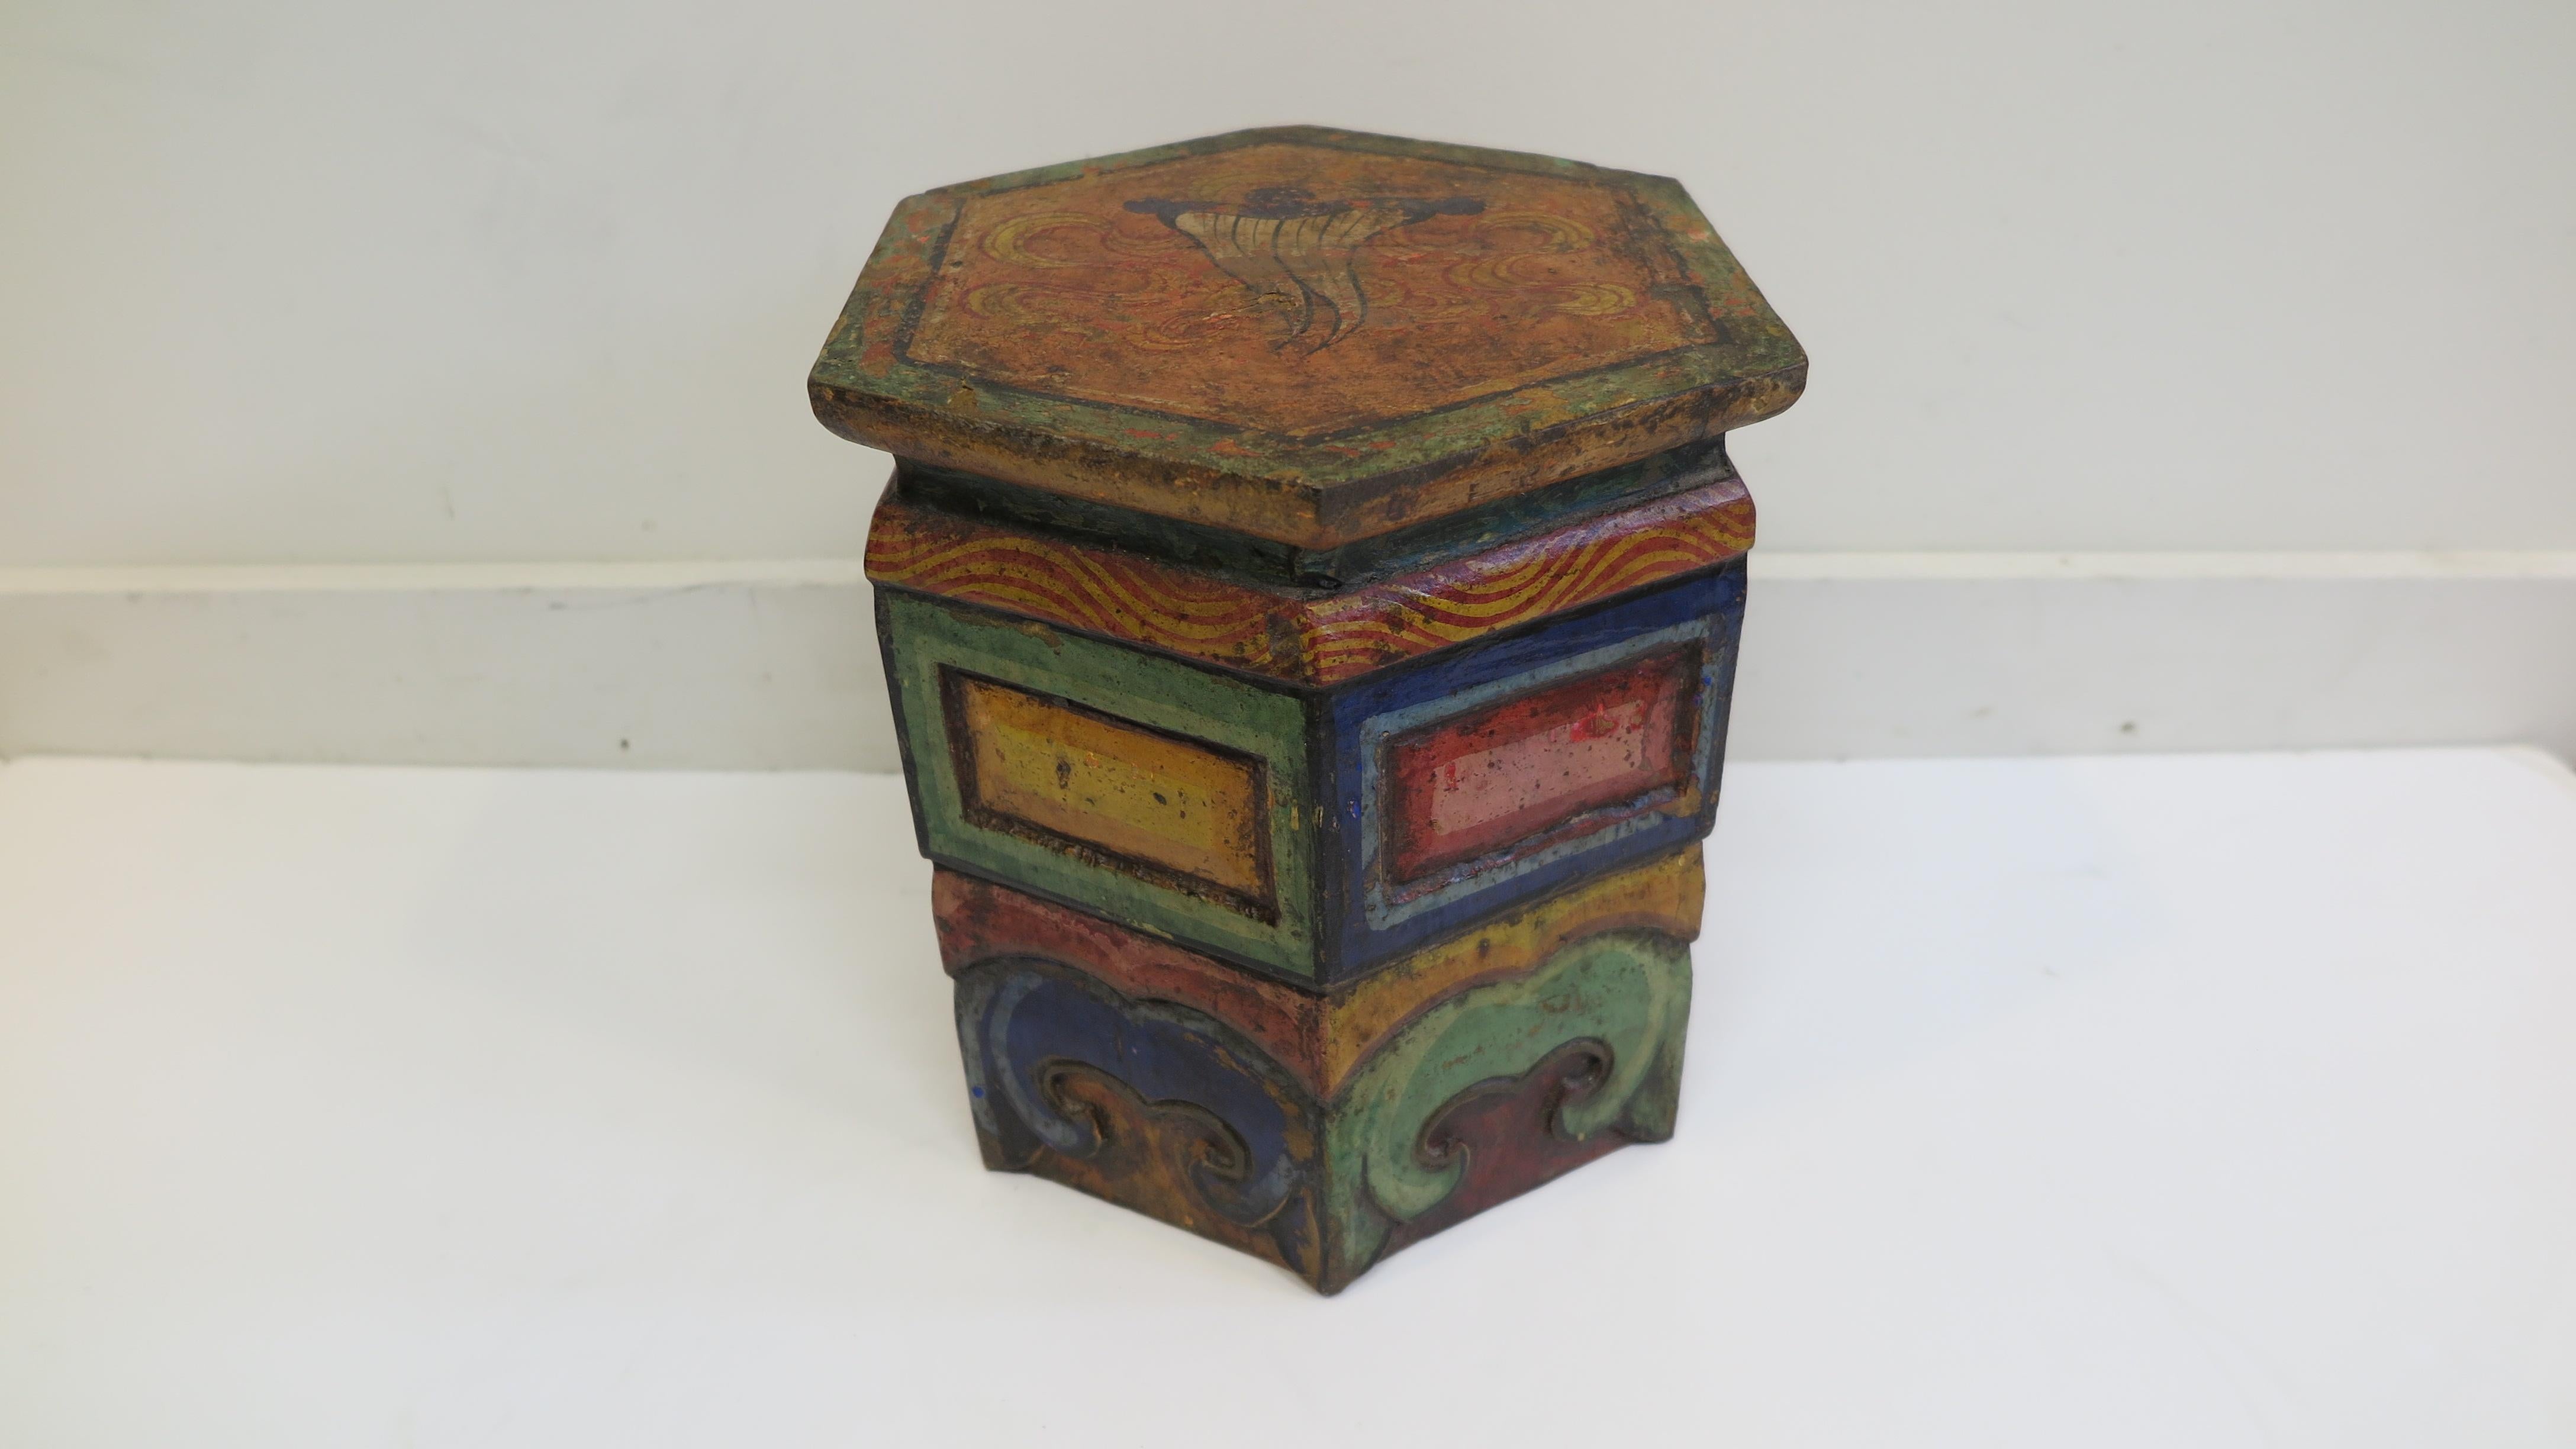 Antique Tibetan stool table. Small traveling stool table used by monks with their practice and for traveling, sometimes used for siting, eating, and offerings. These tables are very small and made with the idea of being travel campions. Nicely